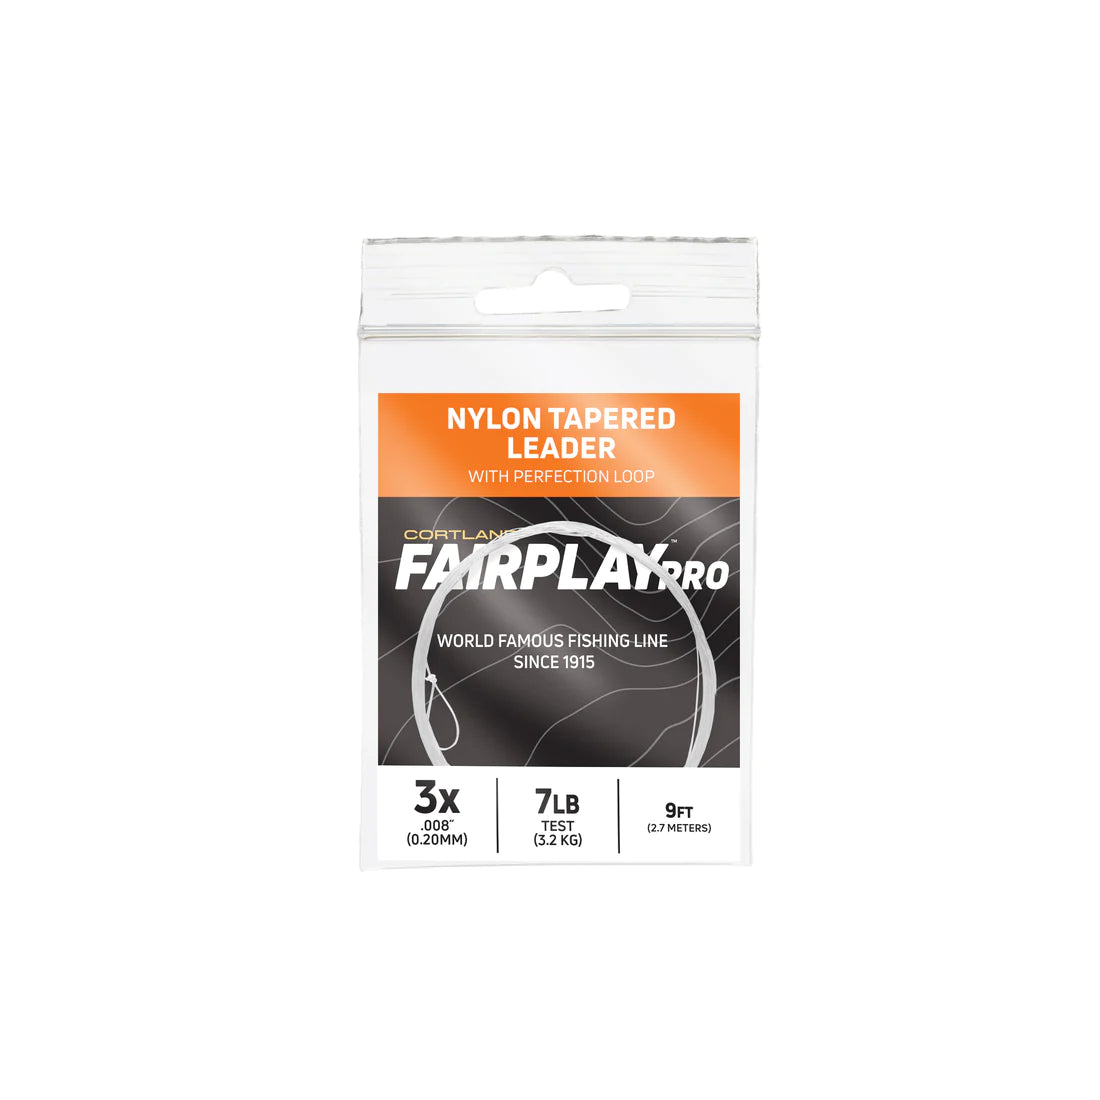 Fairplay Pro Nylon Tapered Leader 9FT